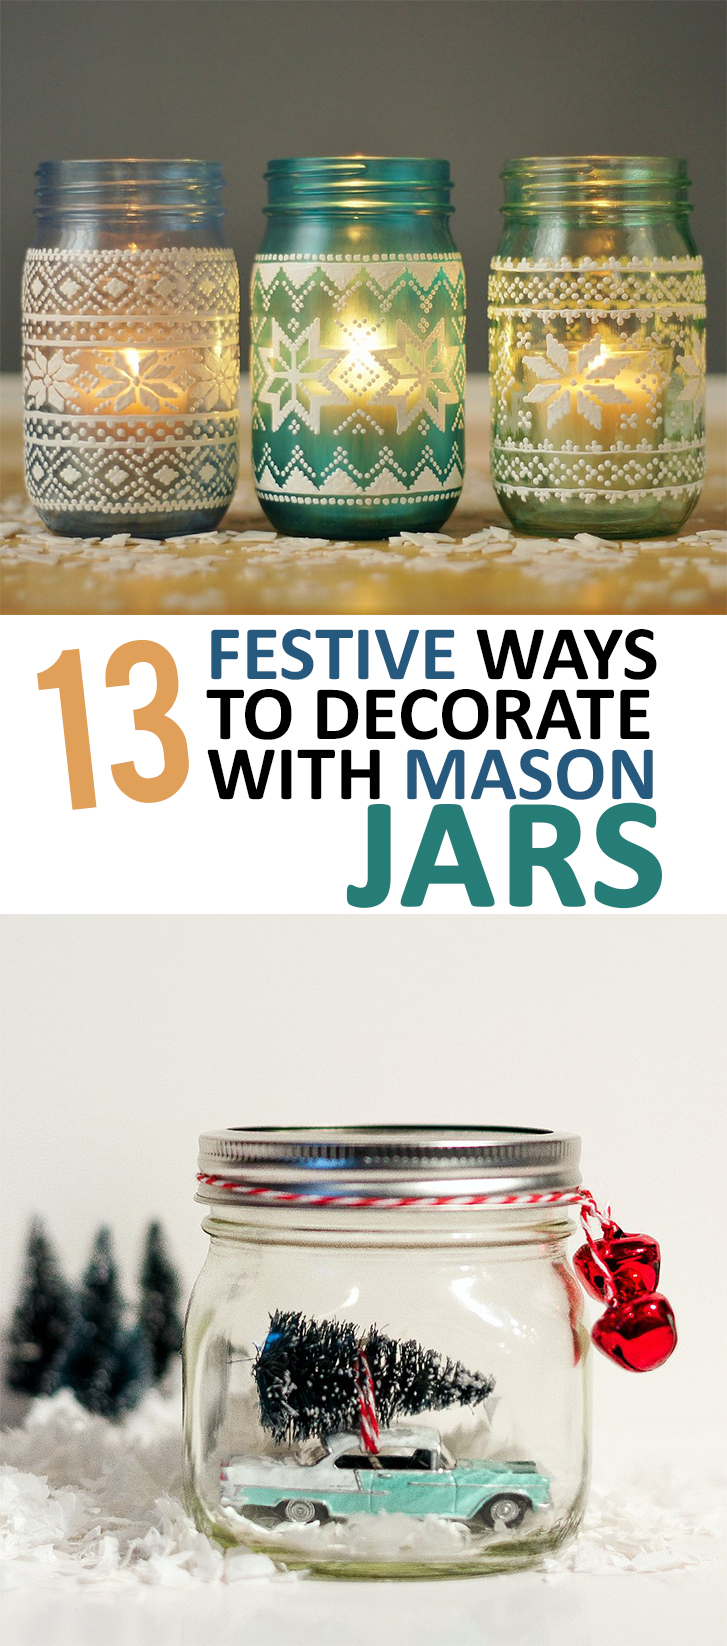 13 Festive Ways to Decorate with Mason Jars – Sunlit Spaces  DIY Home